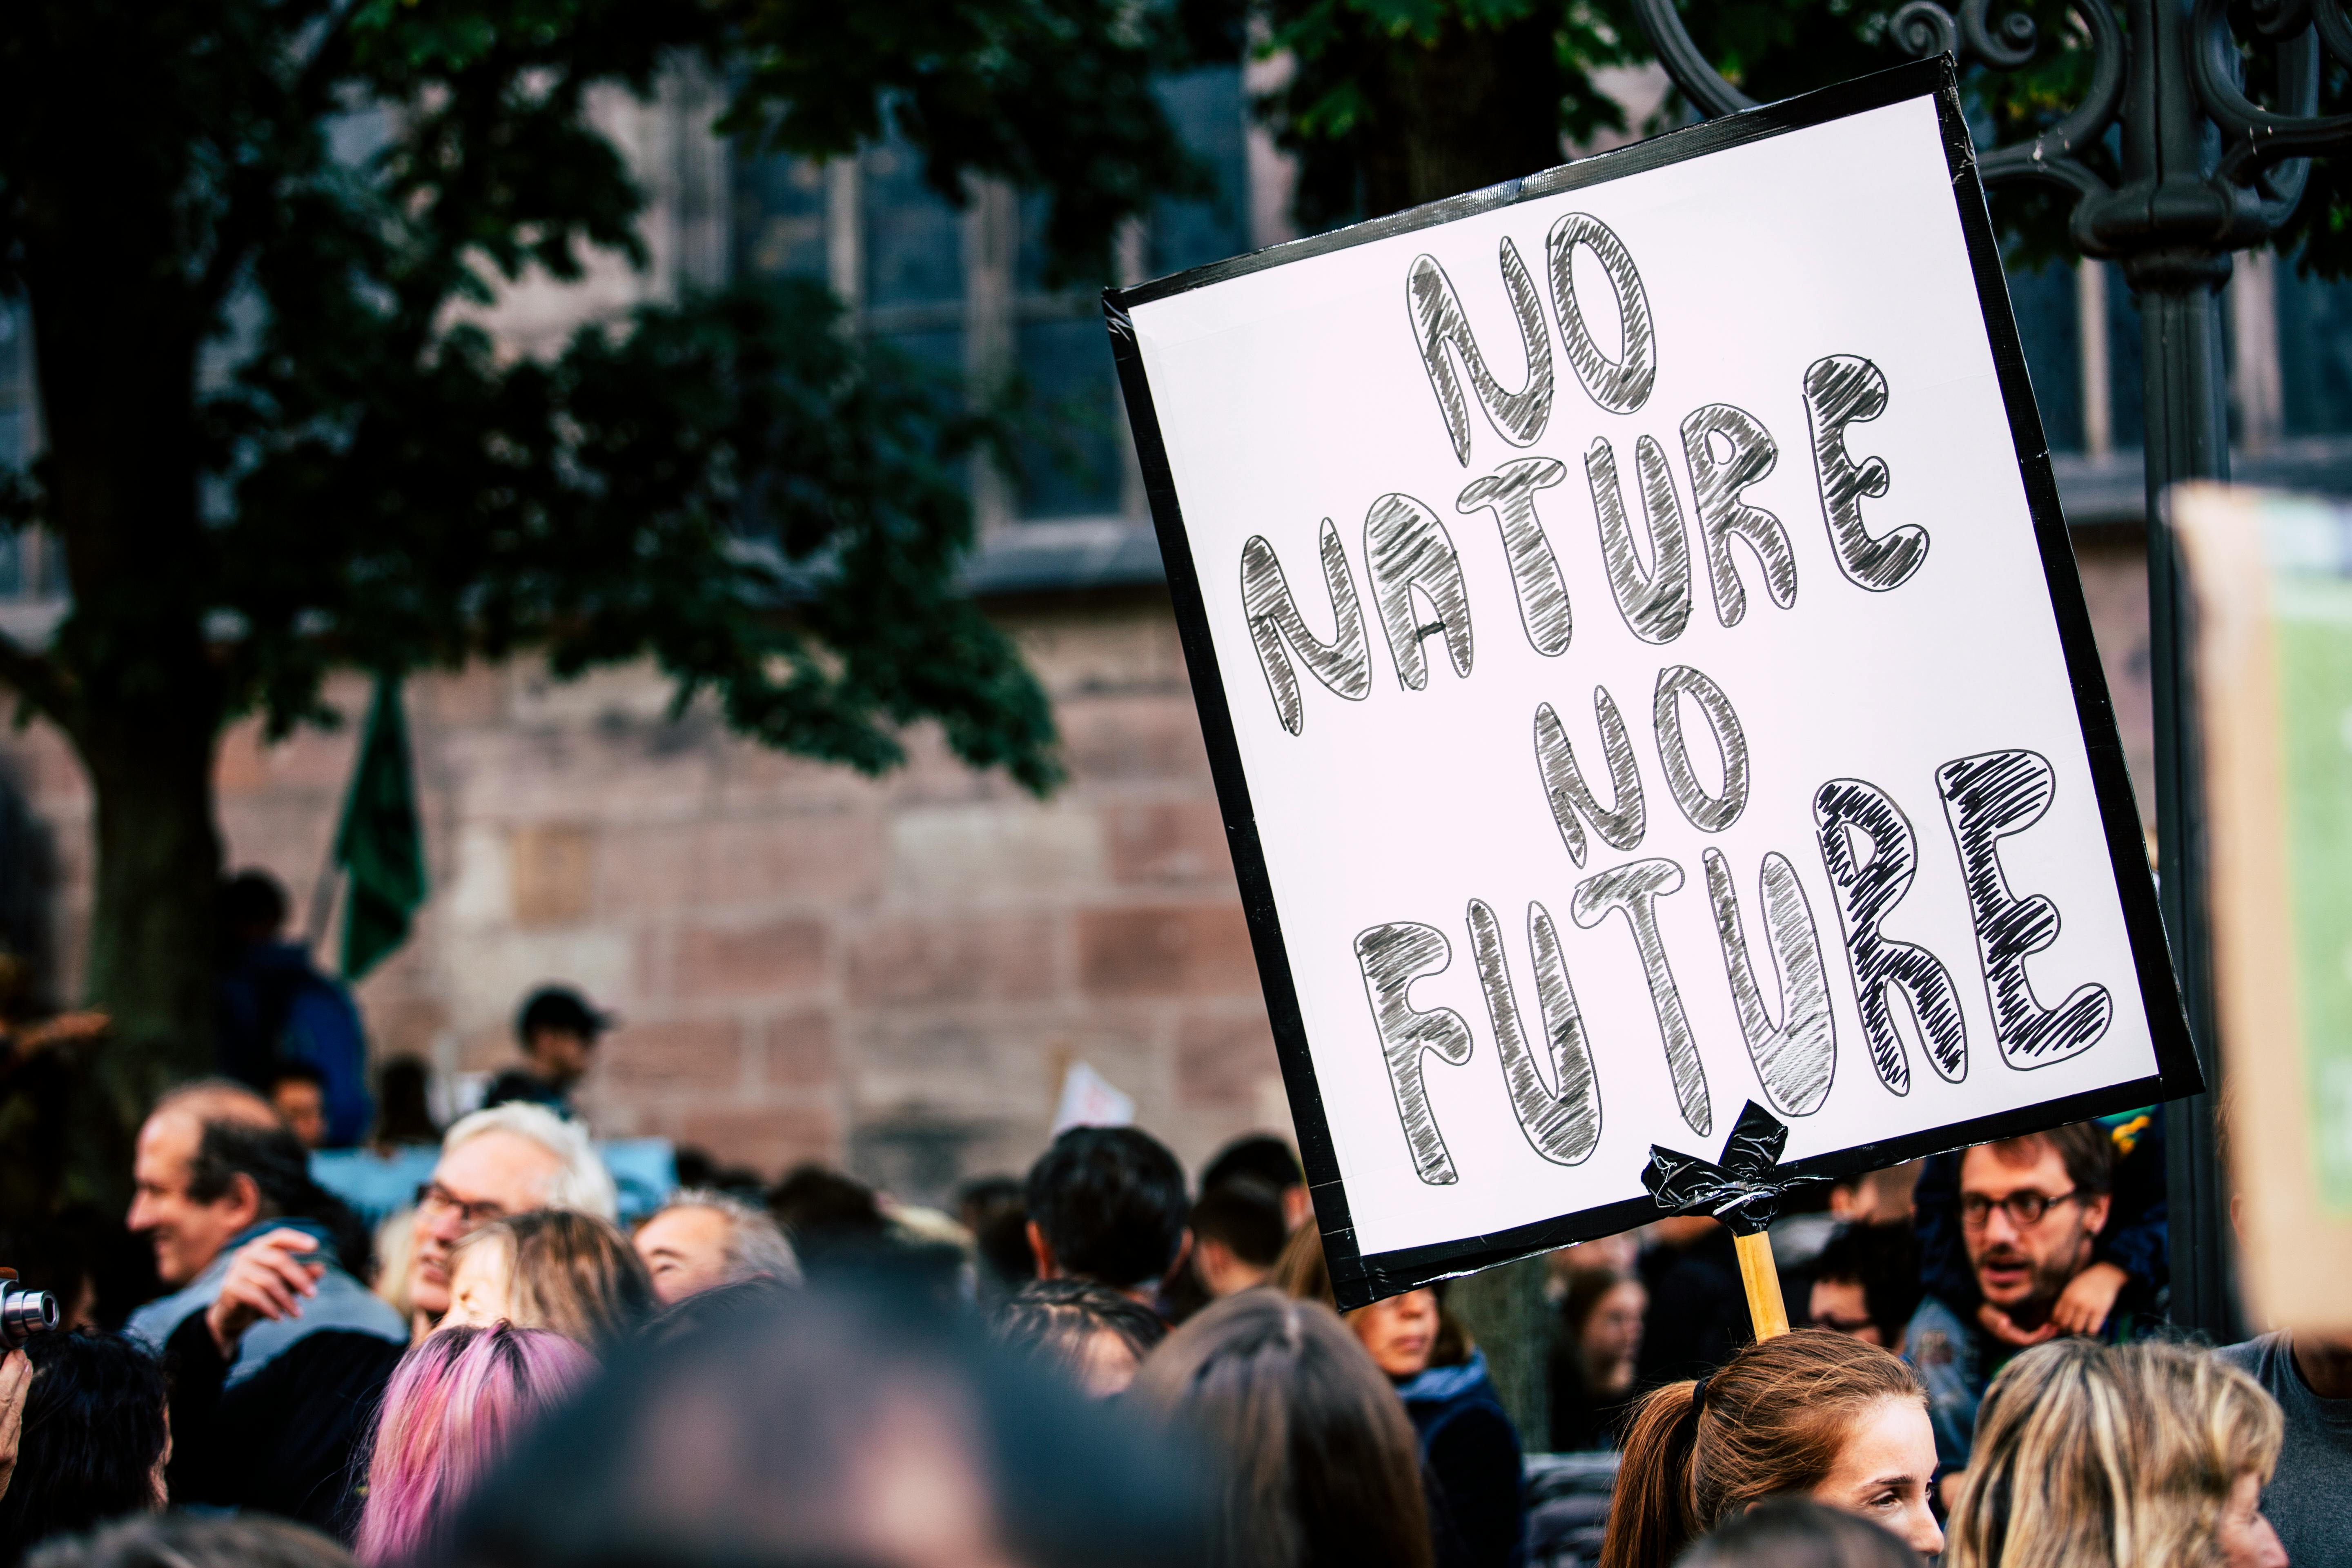 Climate protesters holding sign "no nature, no future"